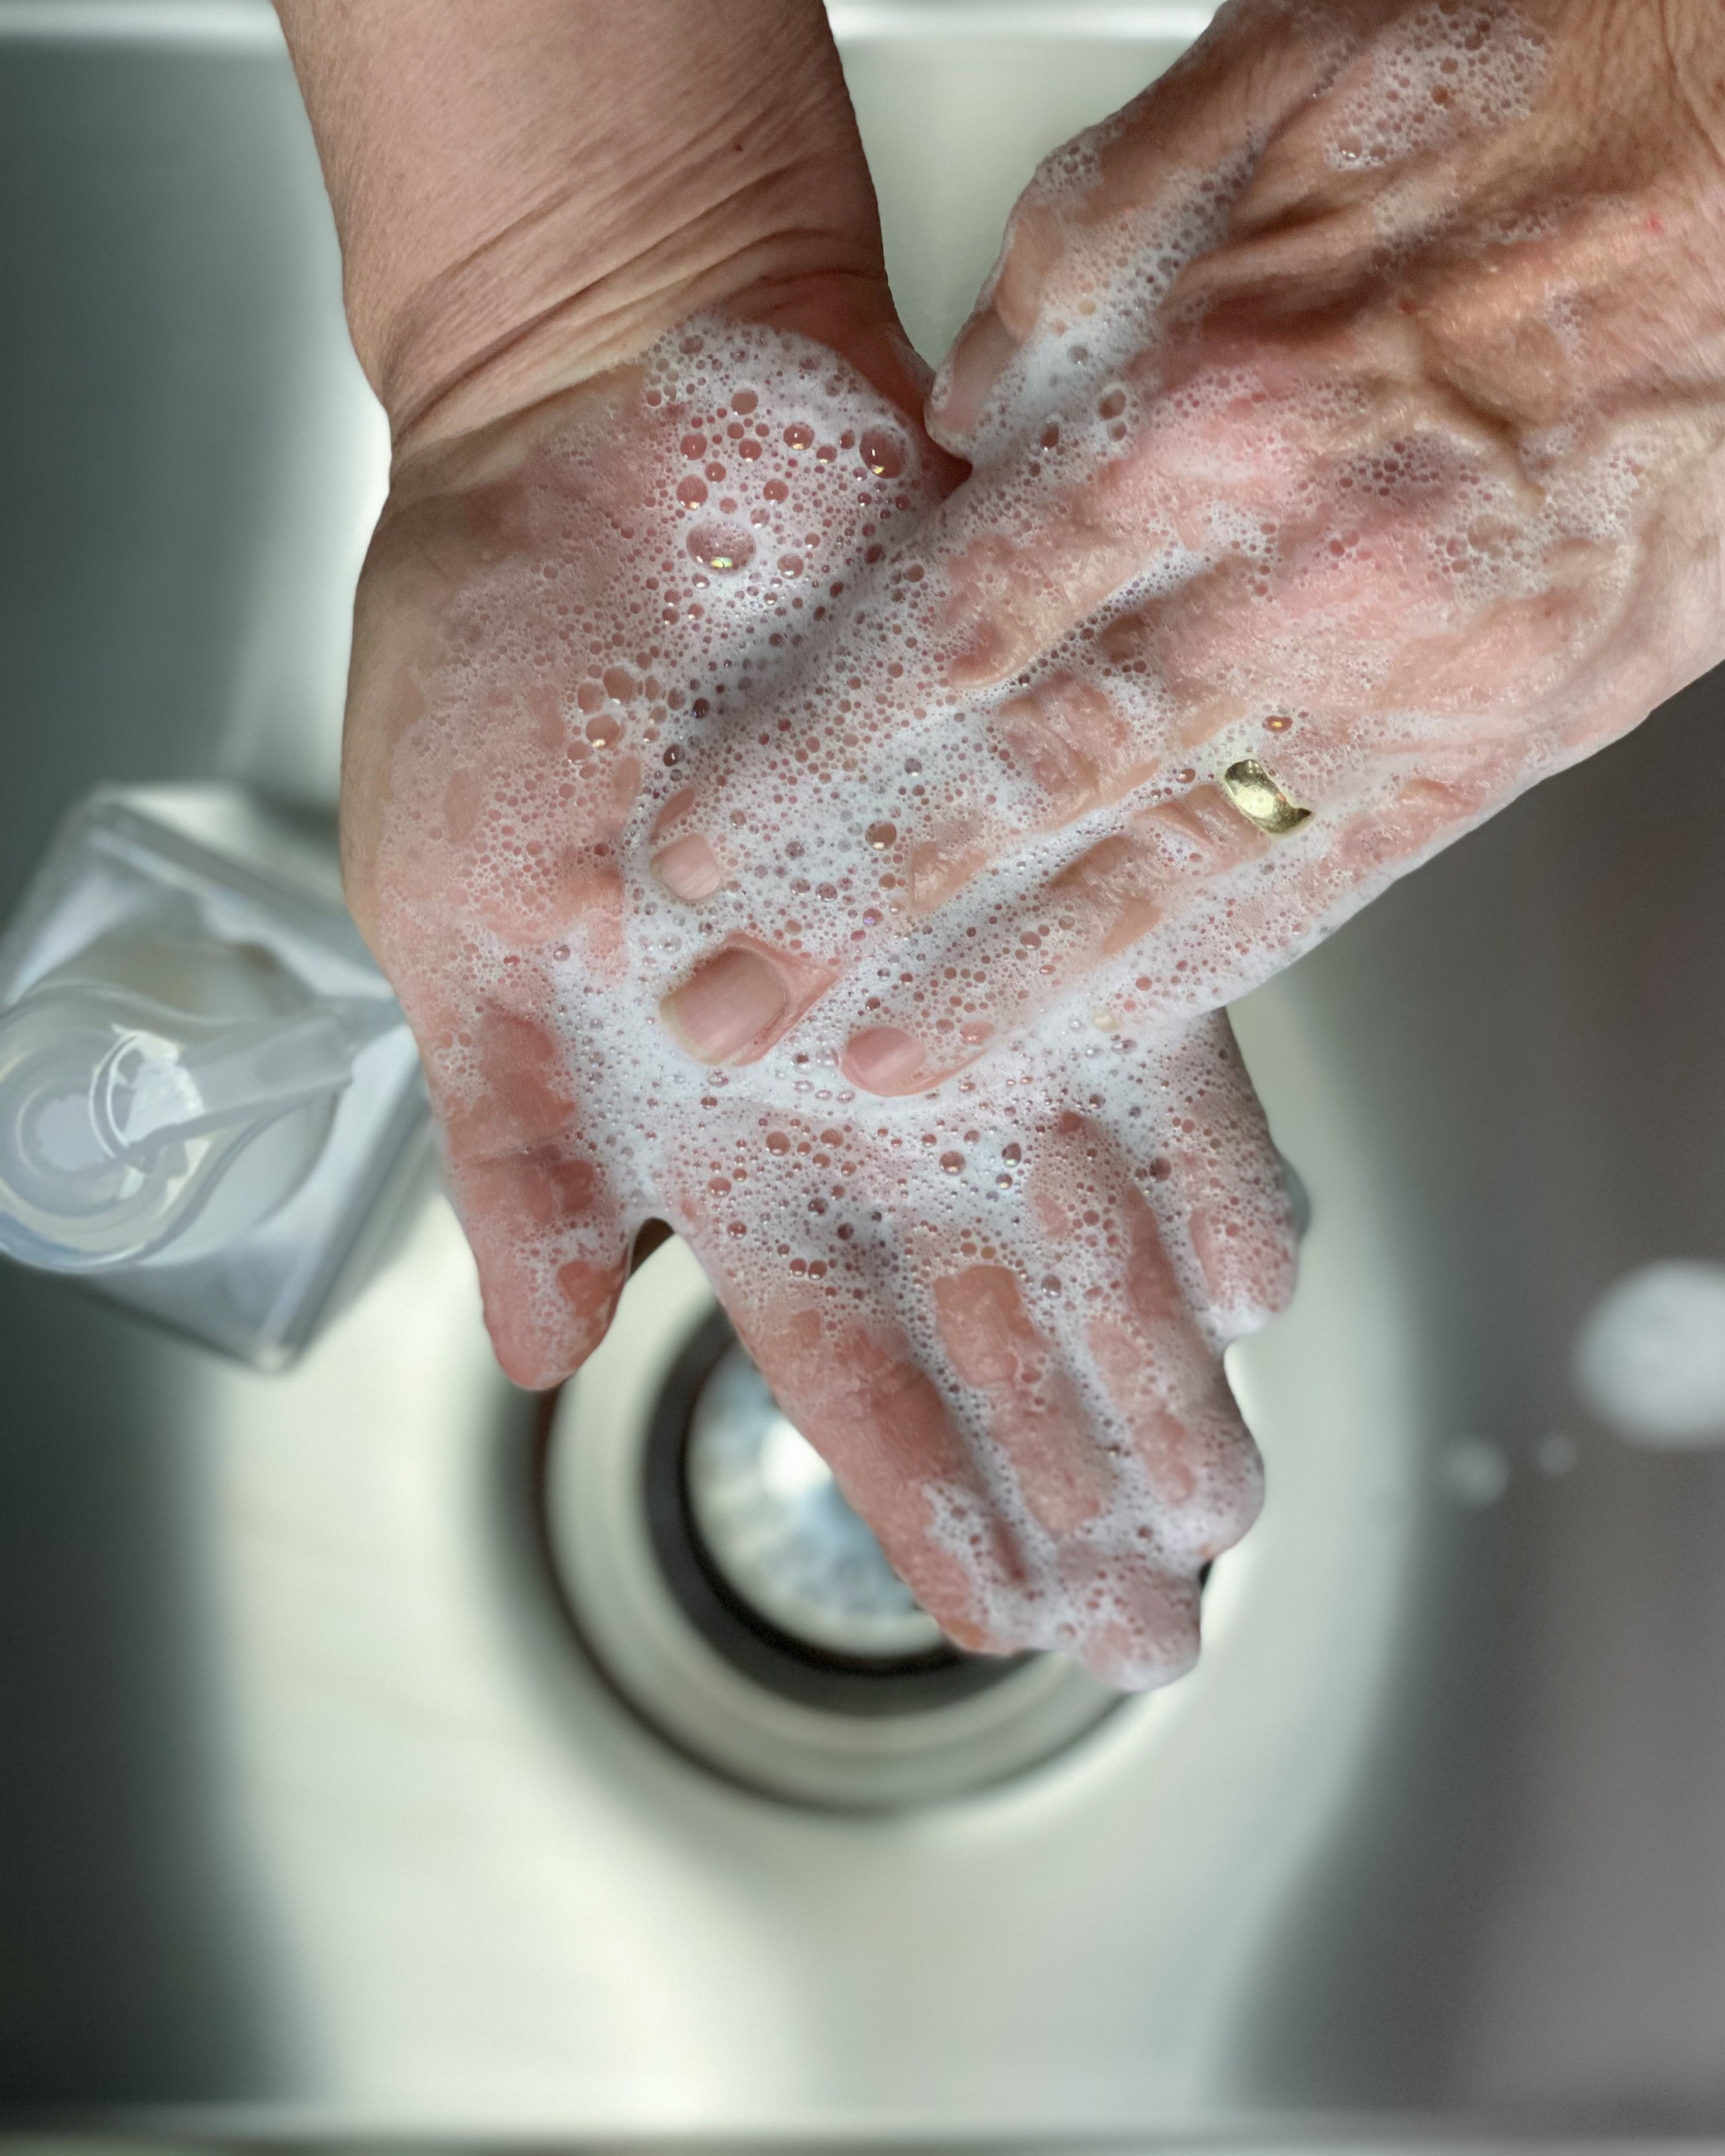 Woman washing hands over a sink with foaming hand wash